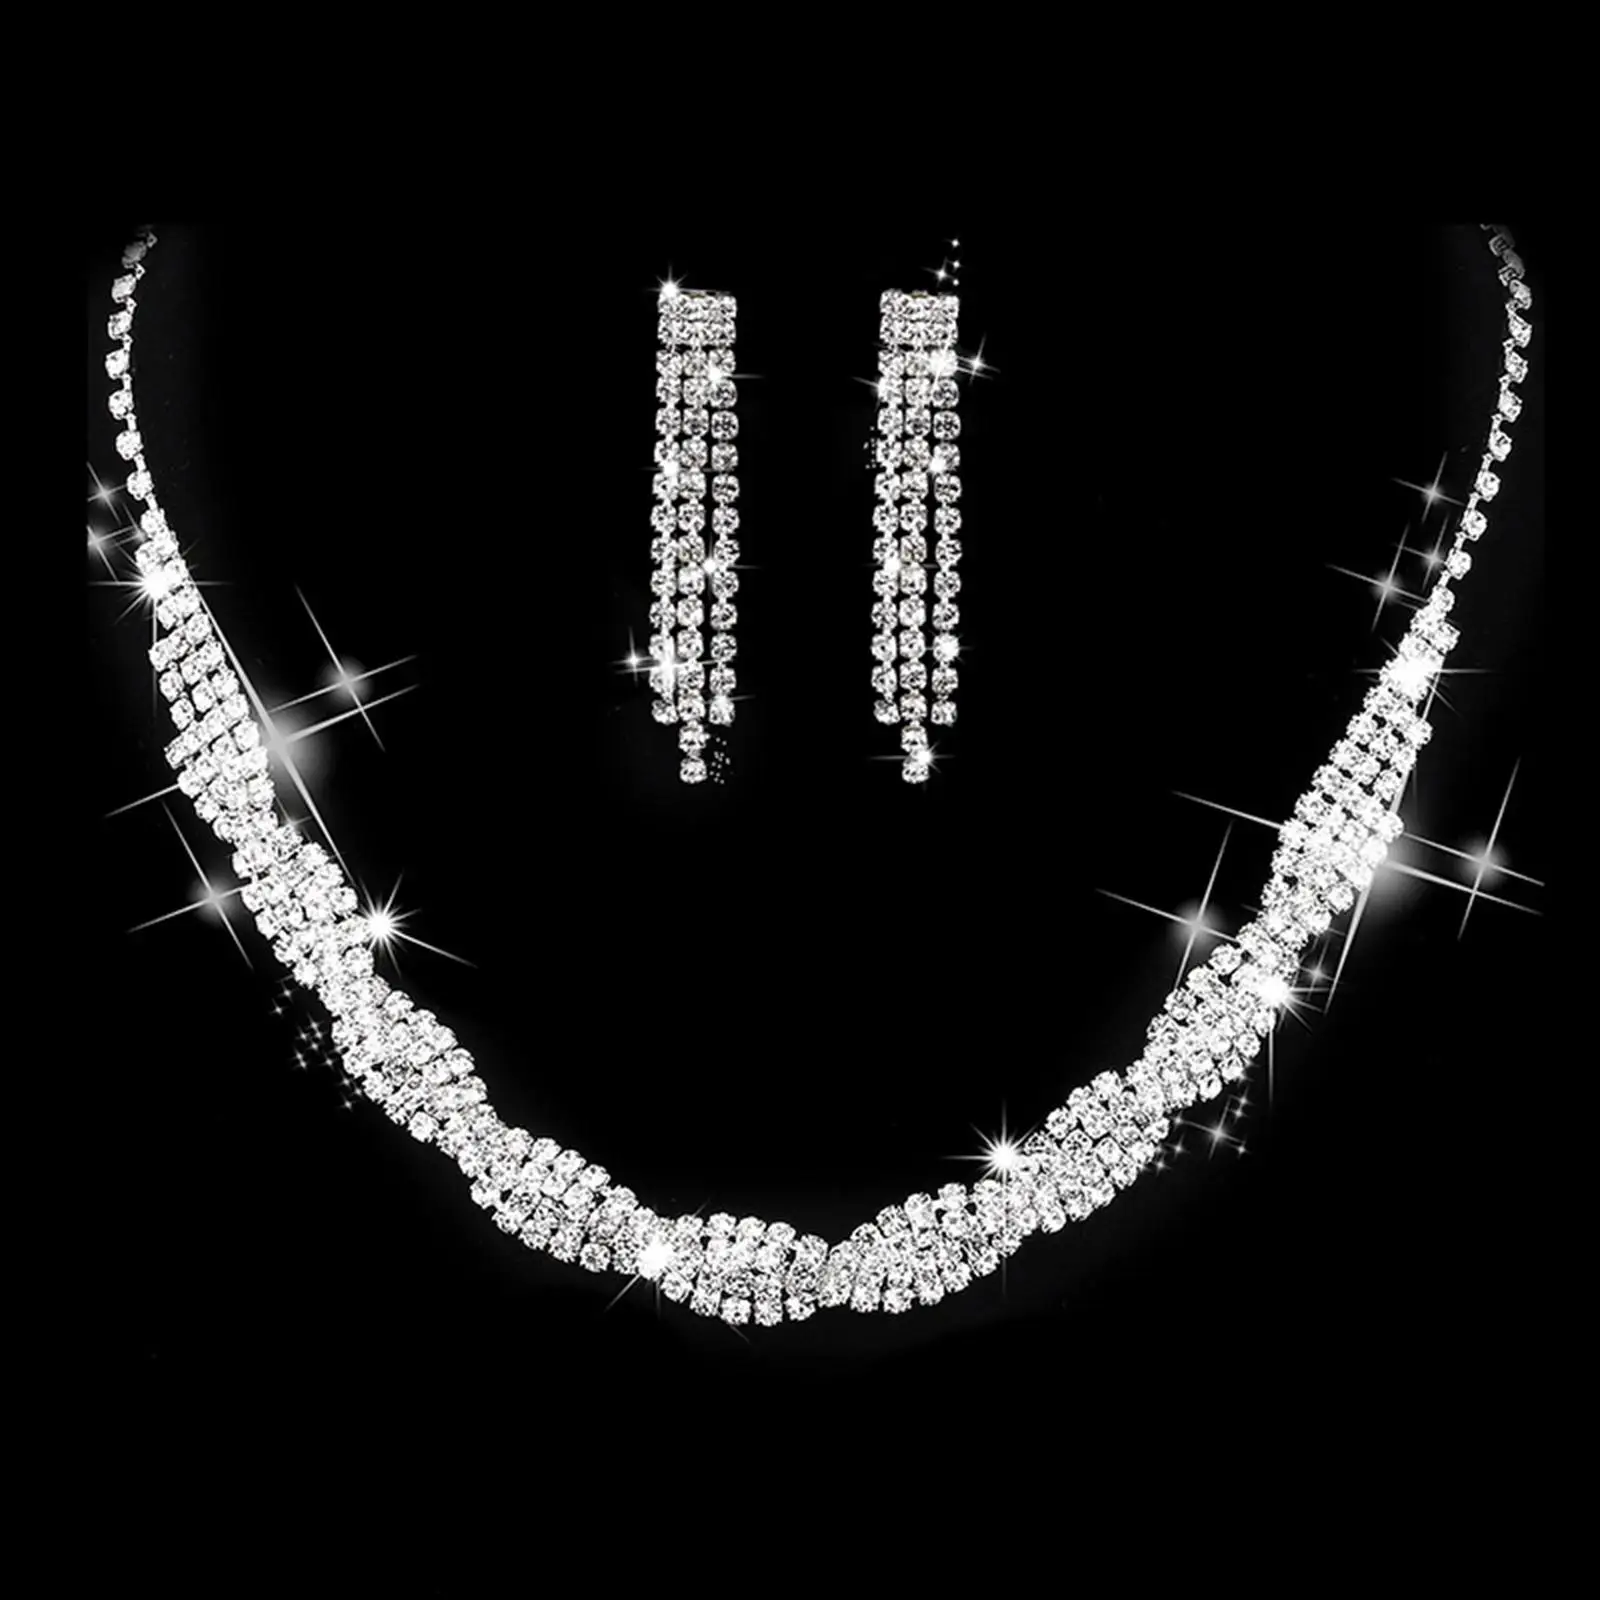 Wedding Jewelry Rhinestone Necklace Earrings for Dating Party Prom Costume